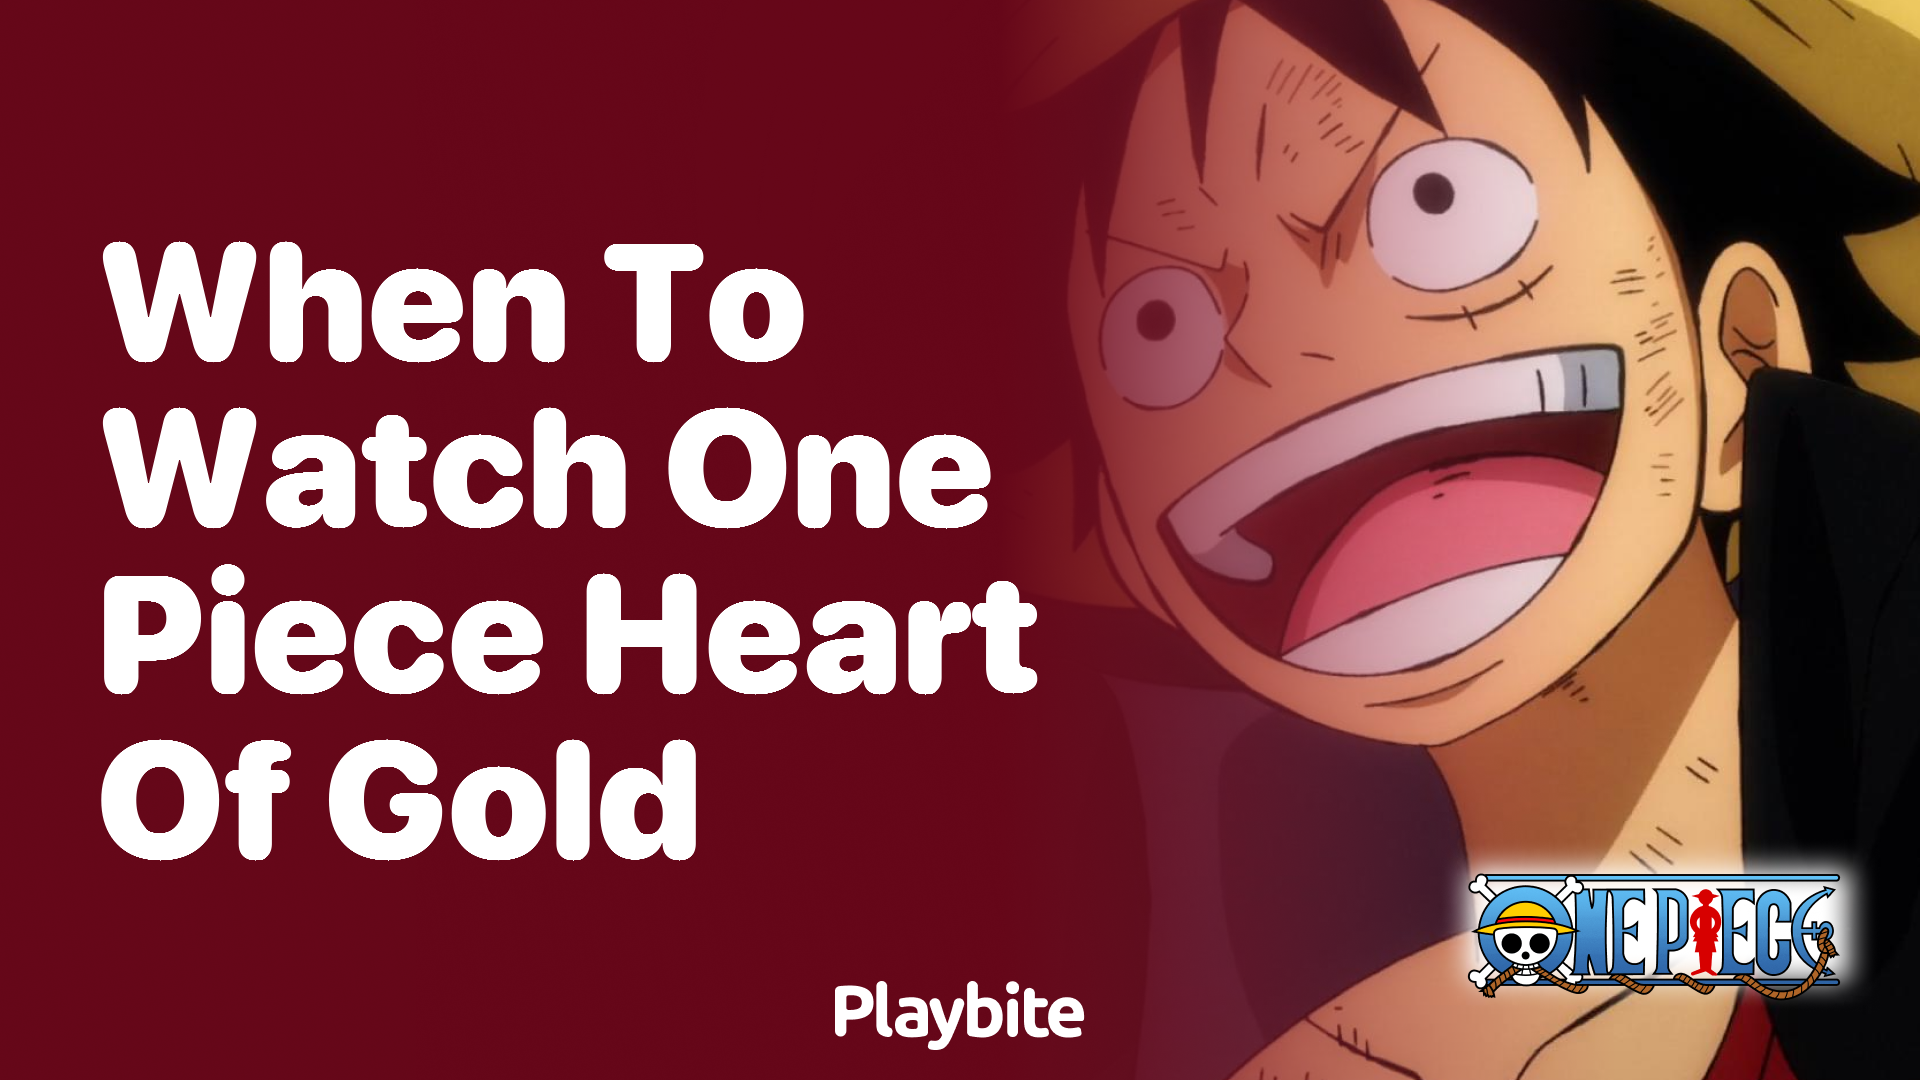 When to Watch One Piece: Heart of Gold